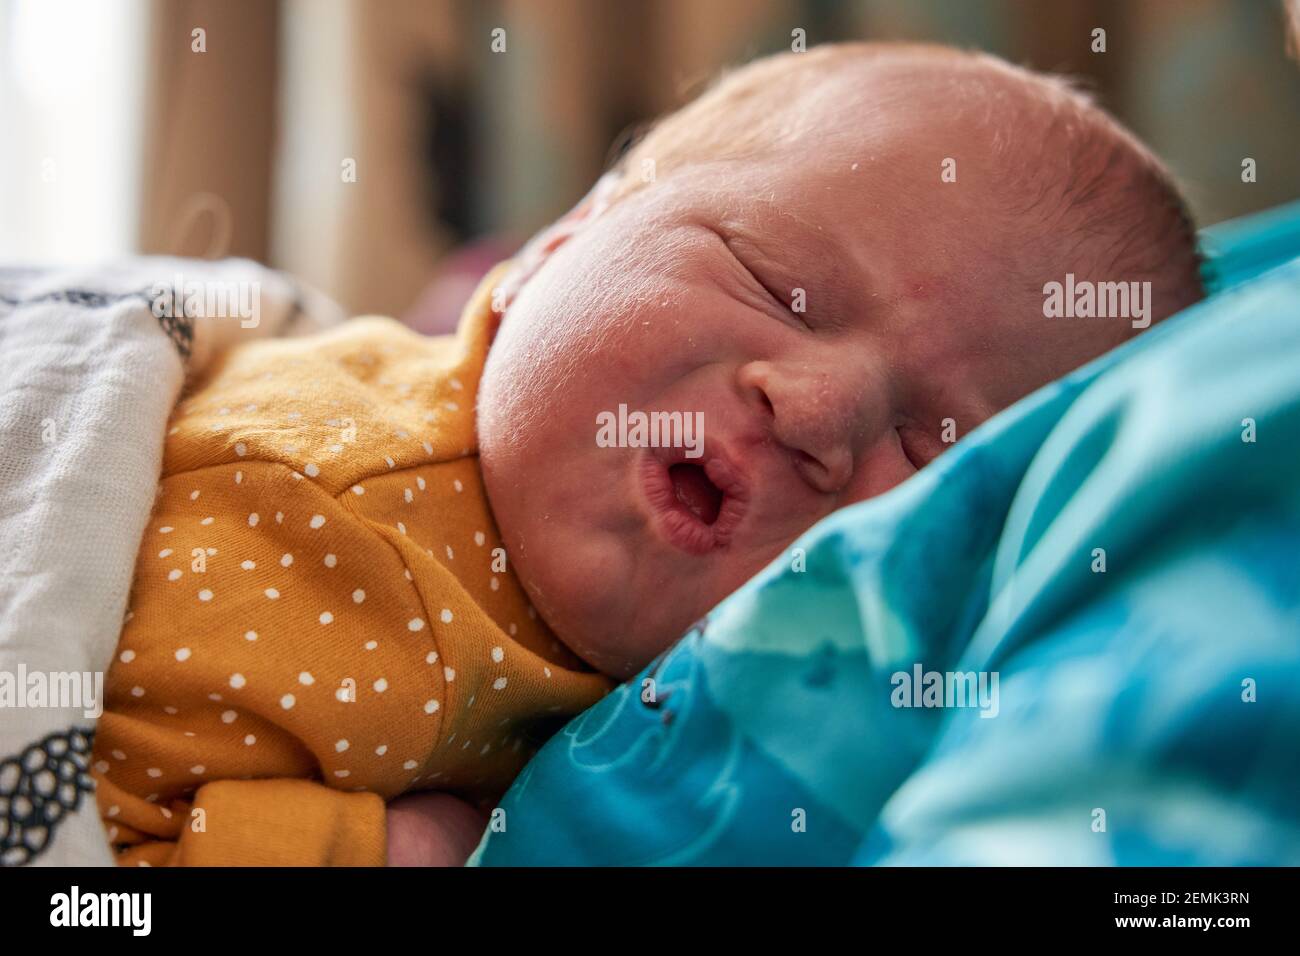 The facial expressions of a new born baby girl Stock Photo